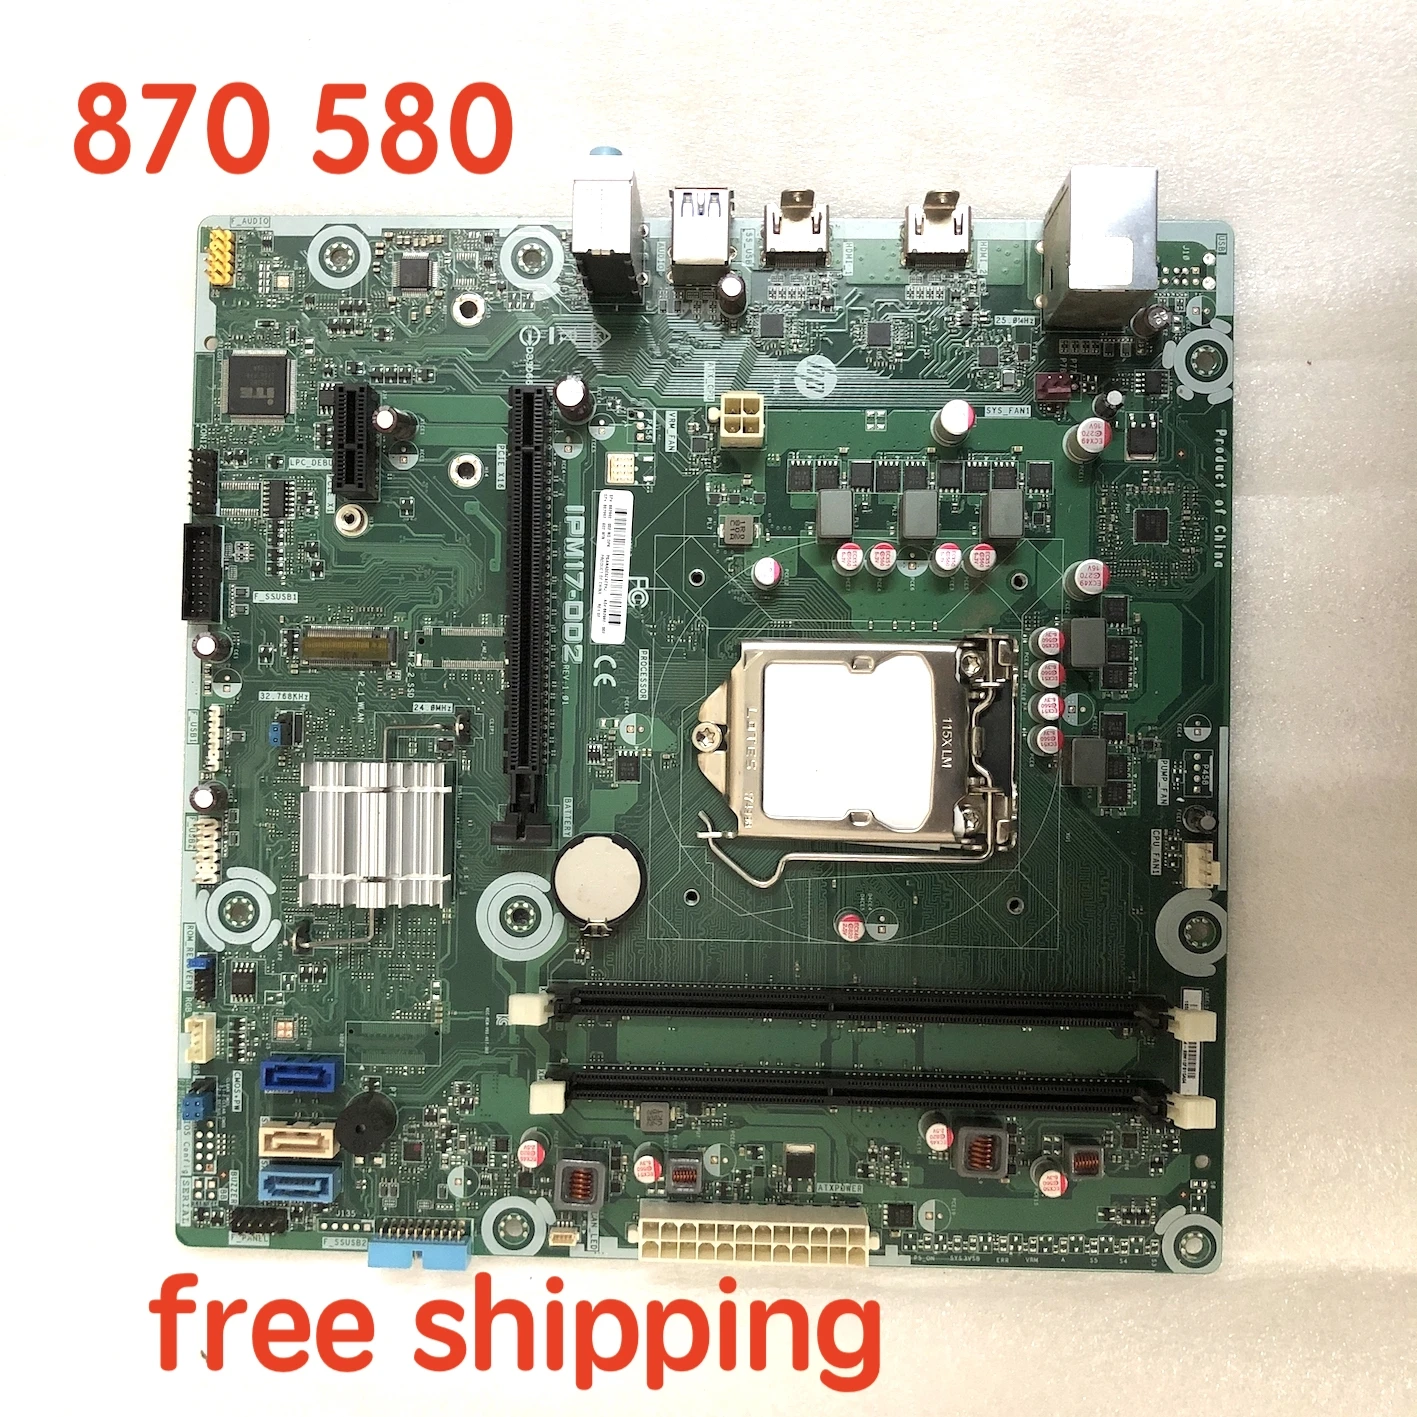 

IPM17-DD2 For HP 870 580 Motherboard 862992-001 862992-002 862992-601 IPM17-DD2 Mainboard 100%tested fully work